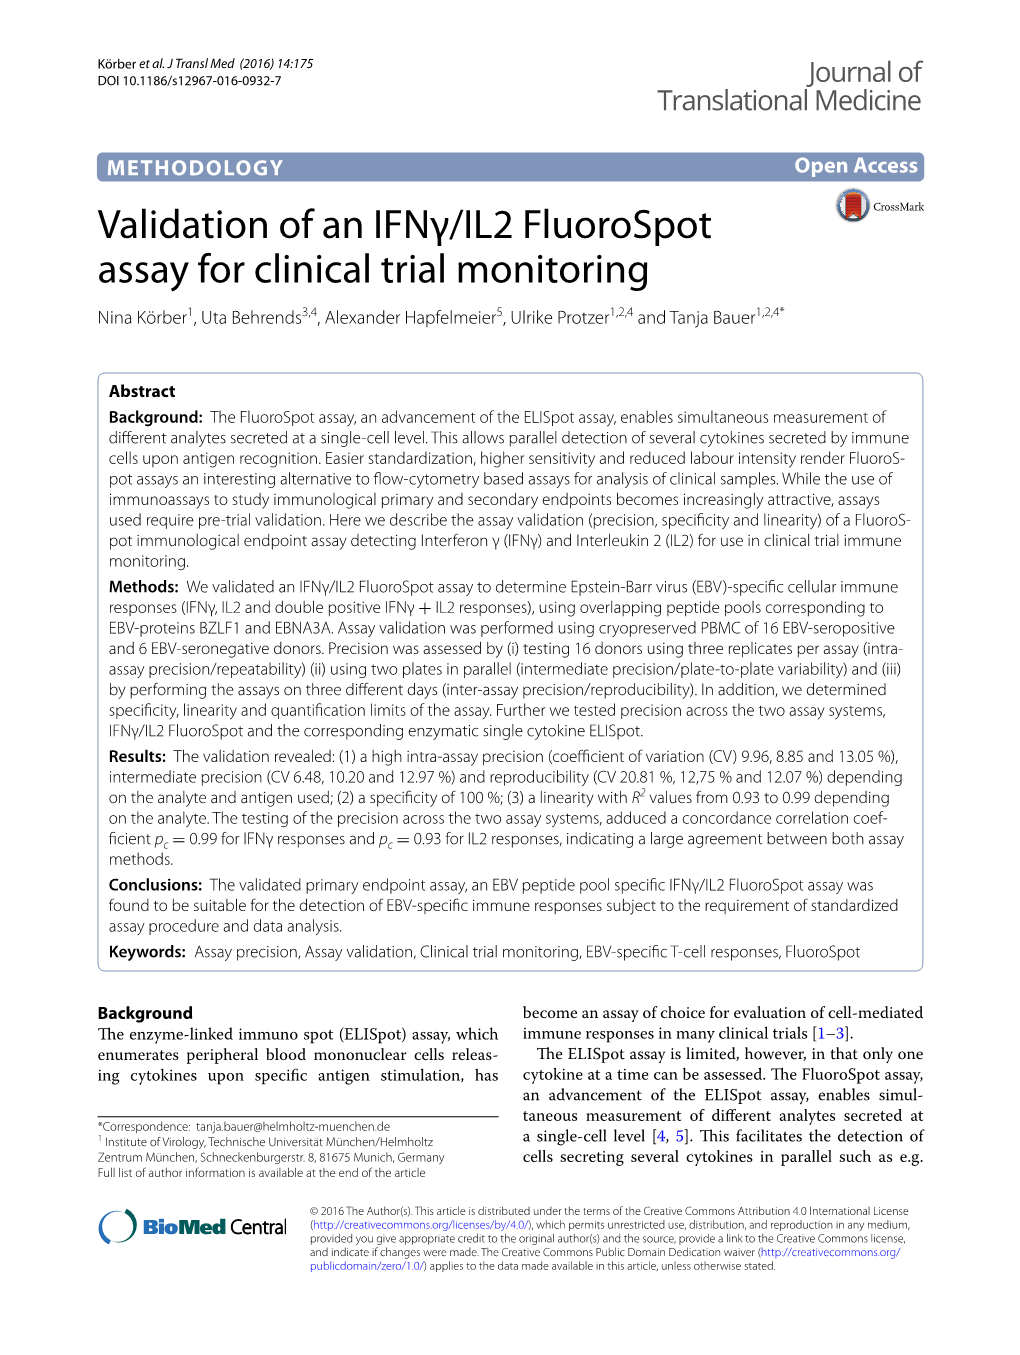 Validation of an Ifnγ/IL2 Fluorospot Assay for Clinical Trial Monitoring